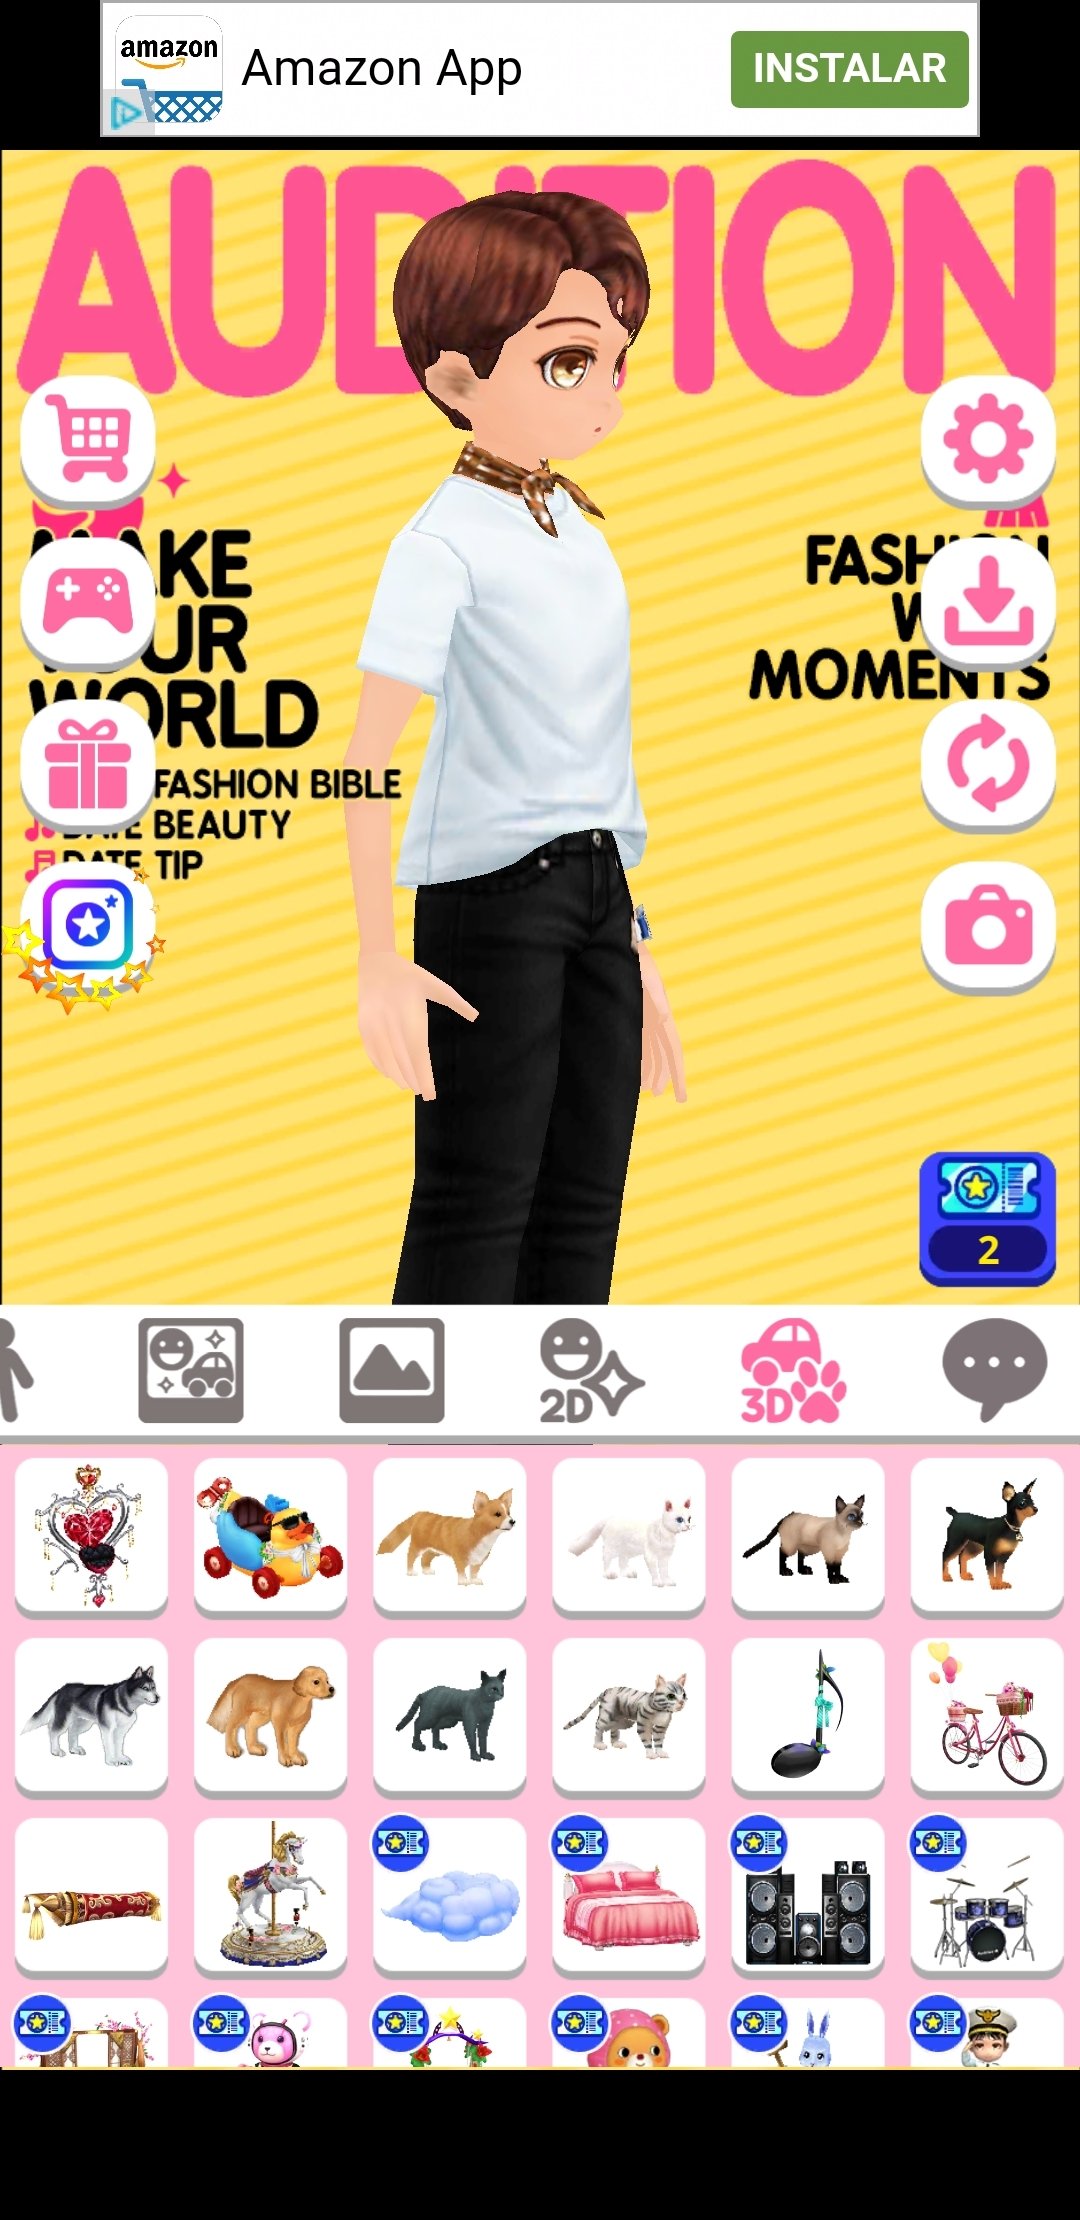 Styledoll on the App Store